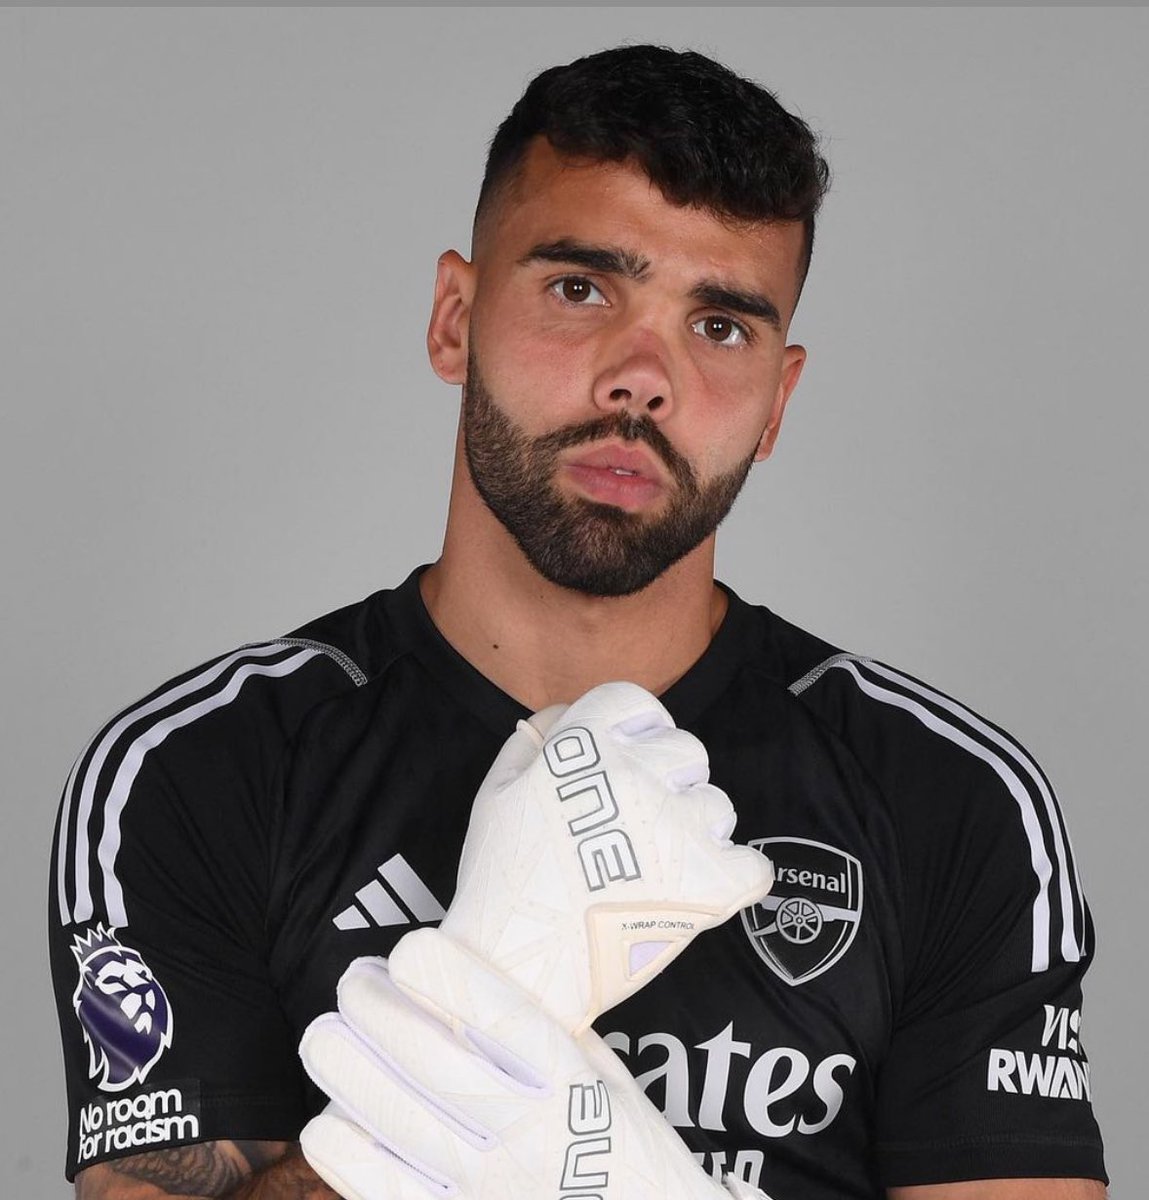 🔴⚪️ Understand Arsenal plan remains clear since last summer: David Raya will become #AFC player on permanent deal from Brentford for £27m.

It’s all verbally agreed between parties.

🥇 David Raya wins the Golden Glove with 15 clean sheets in Premier League, excellent season.